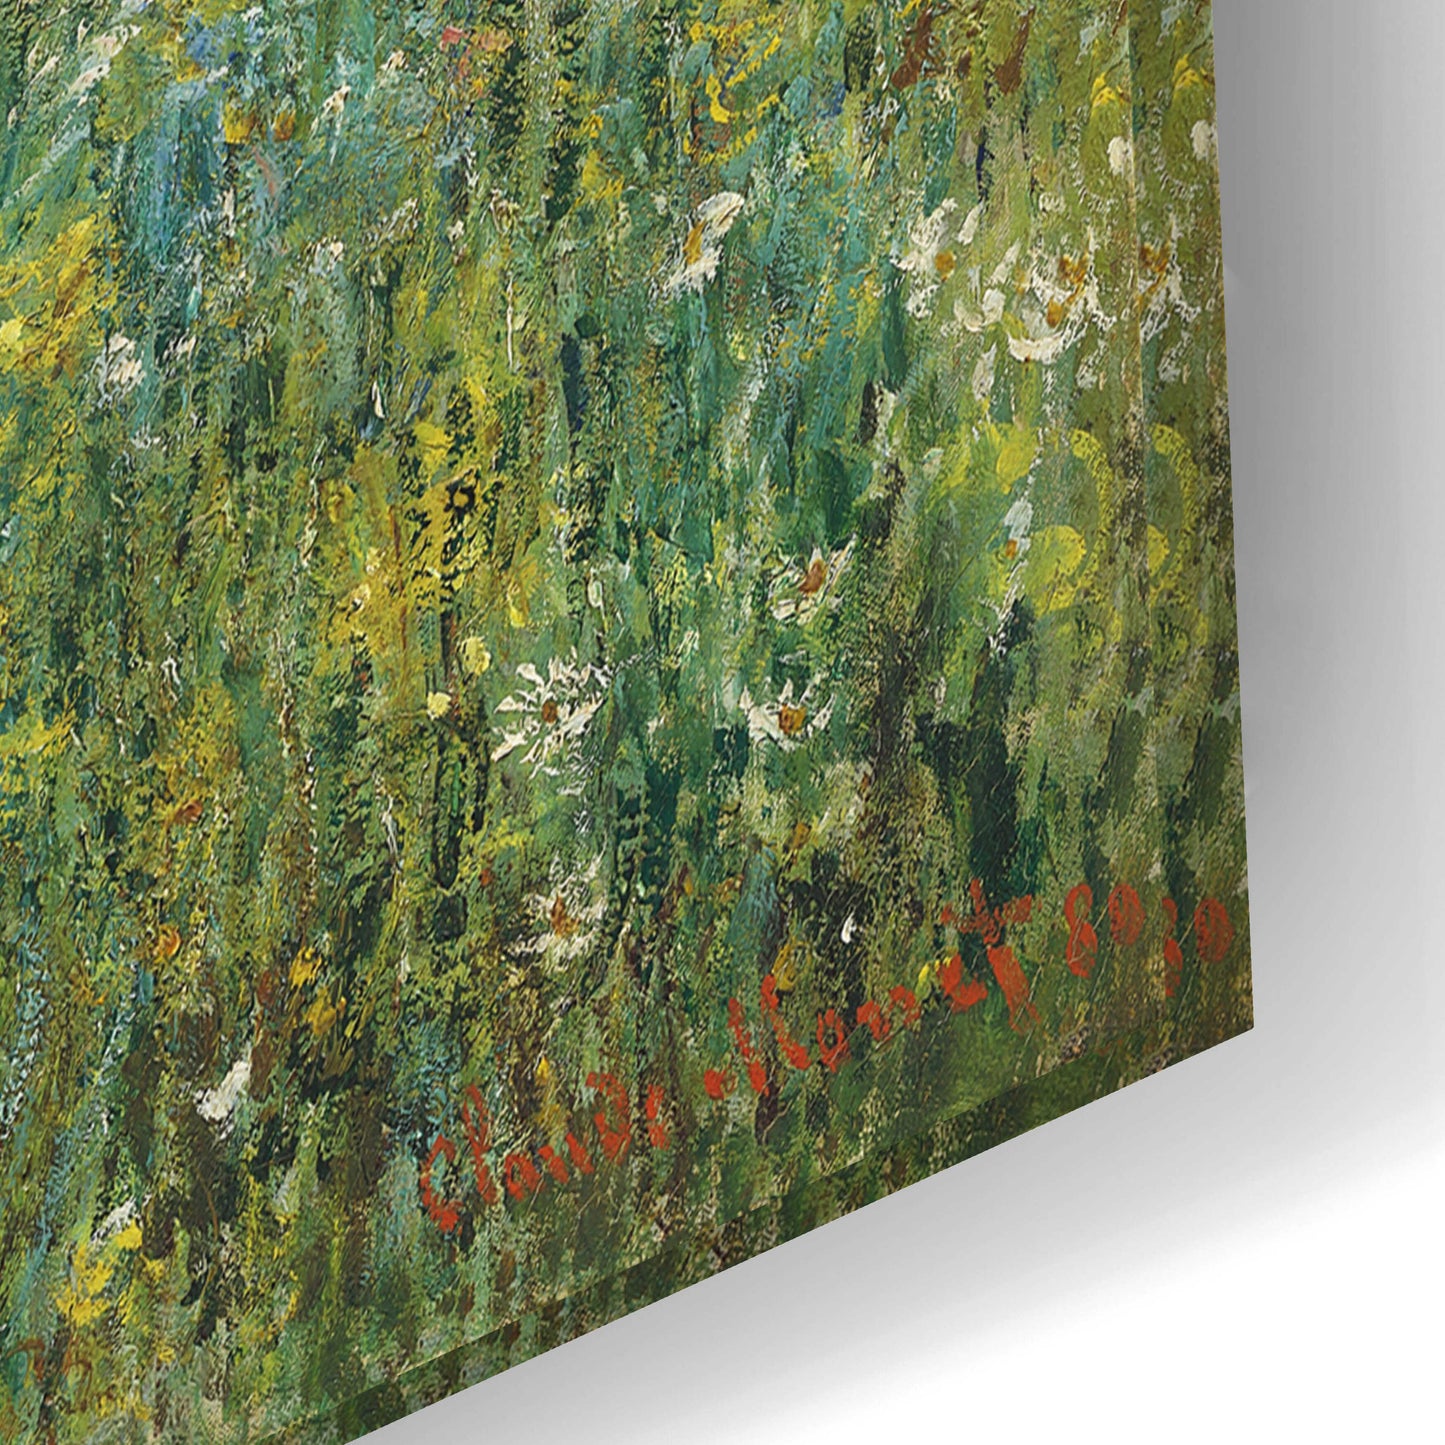 Epic Art 'Banks Od The Seine, Vetheuil' by Claude Monet, Acrylic Glass Wall Art,24x16